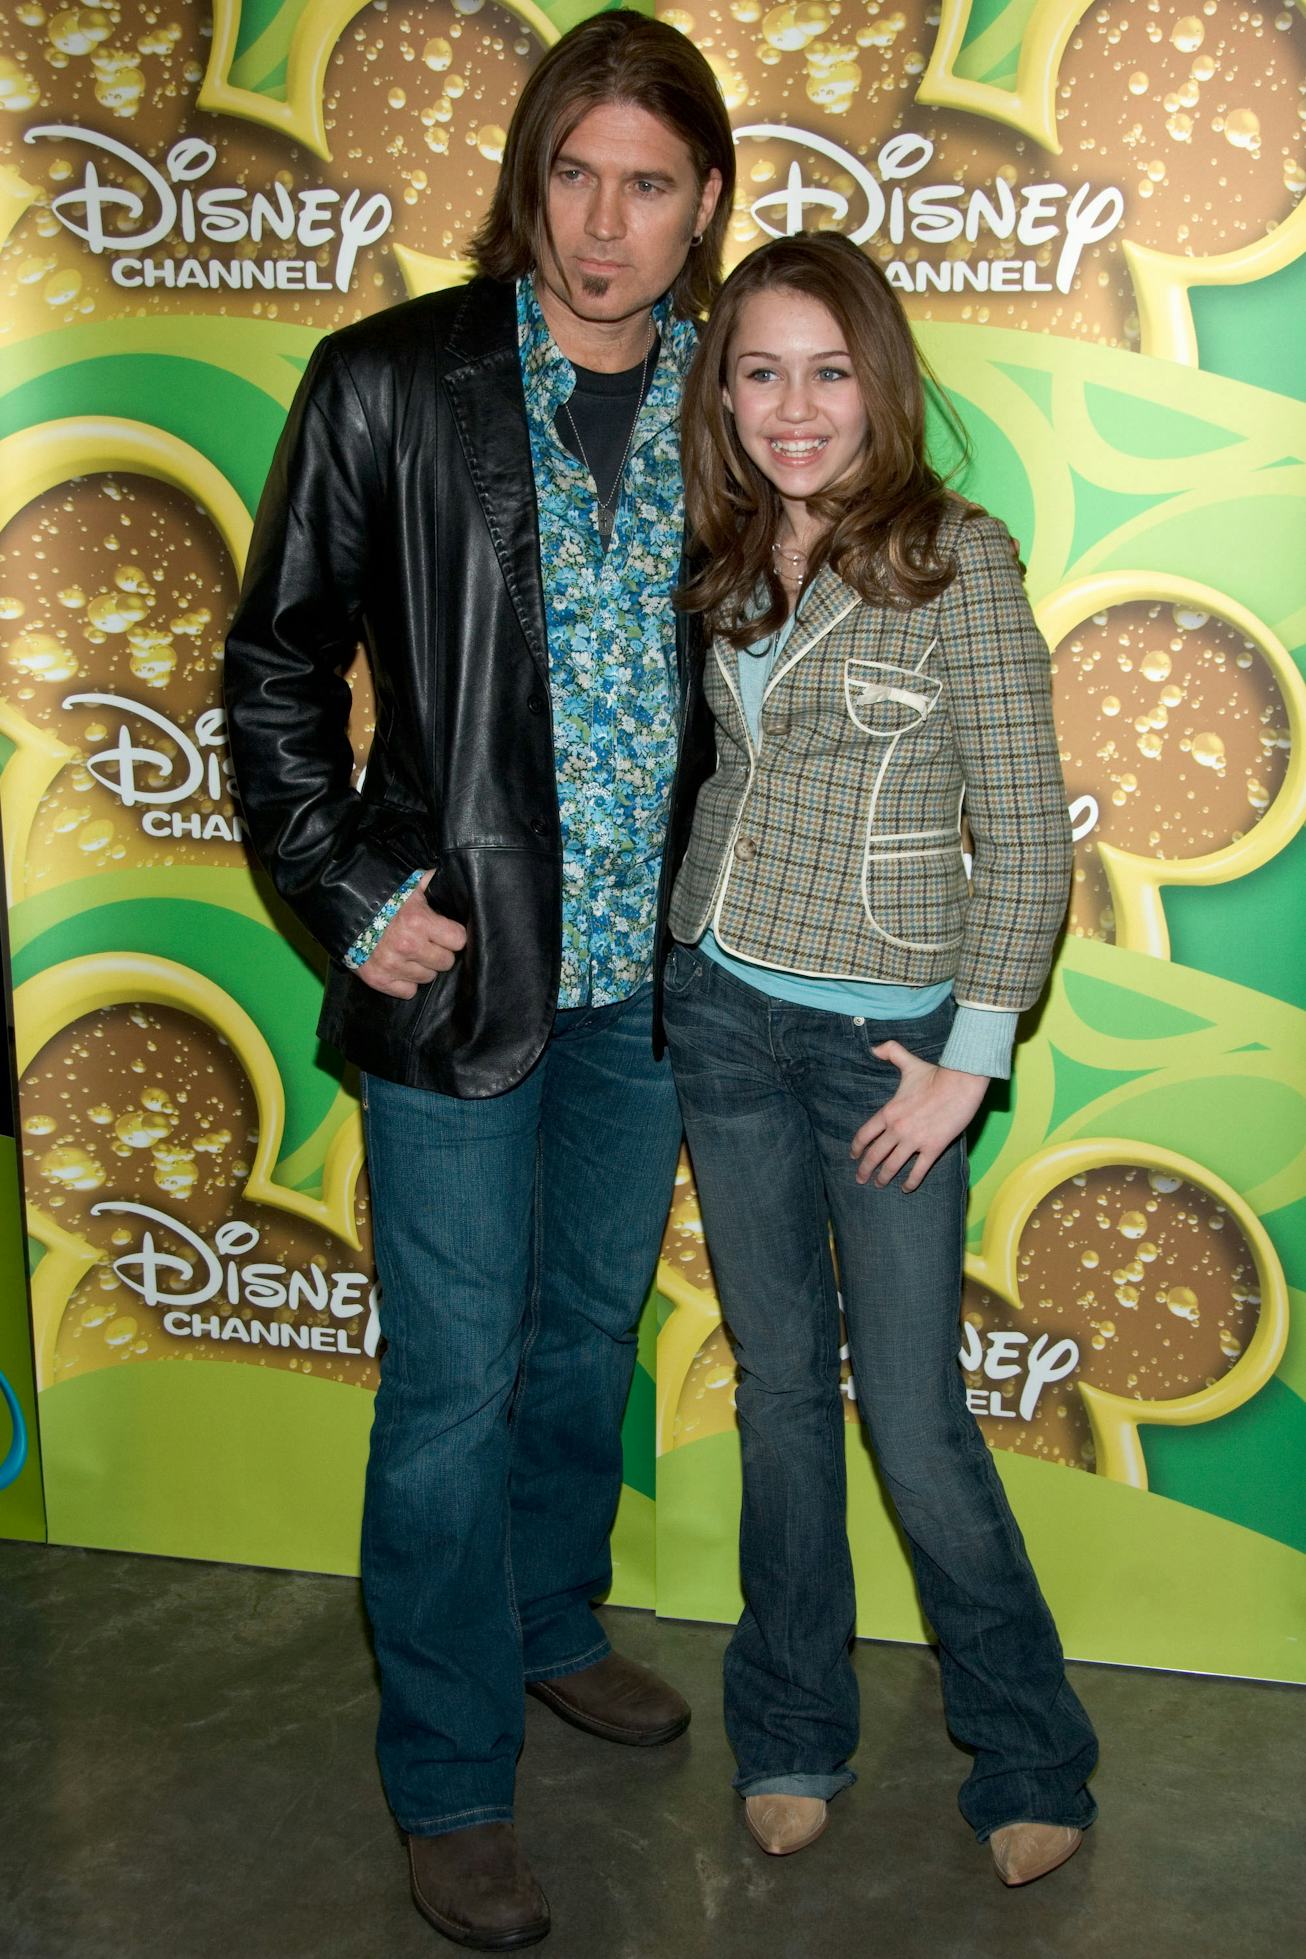 Miley Cyrus and Billy Ray Cyrus at the 2006 Disney Winter Upfront